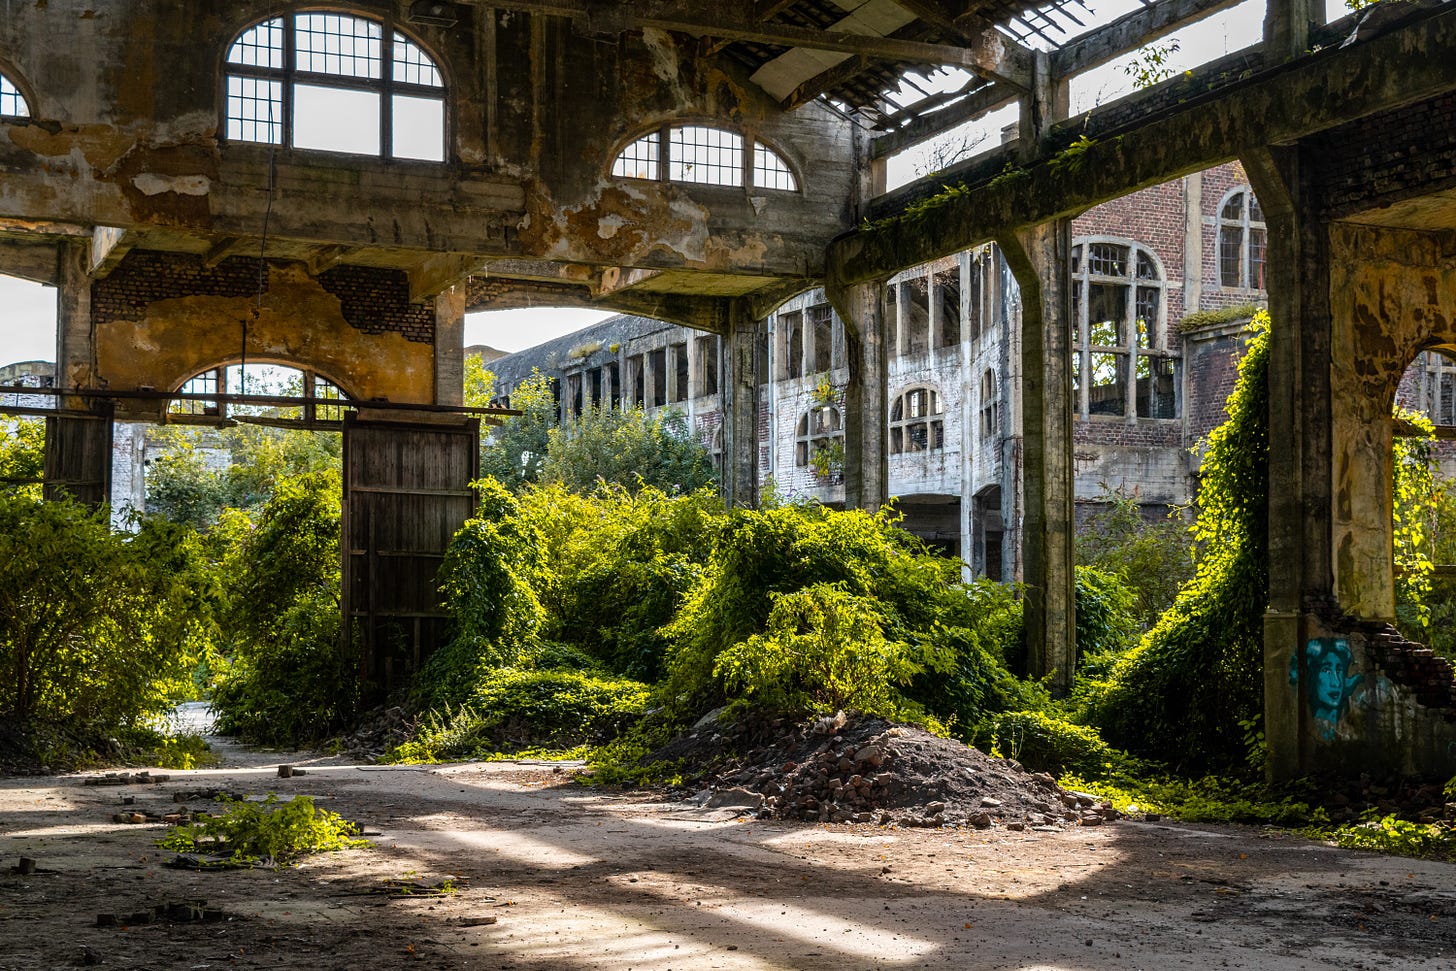 An abandoned warehouse with plants growing inside.